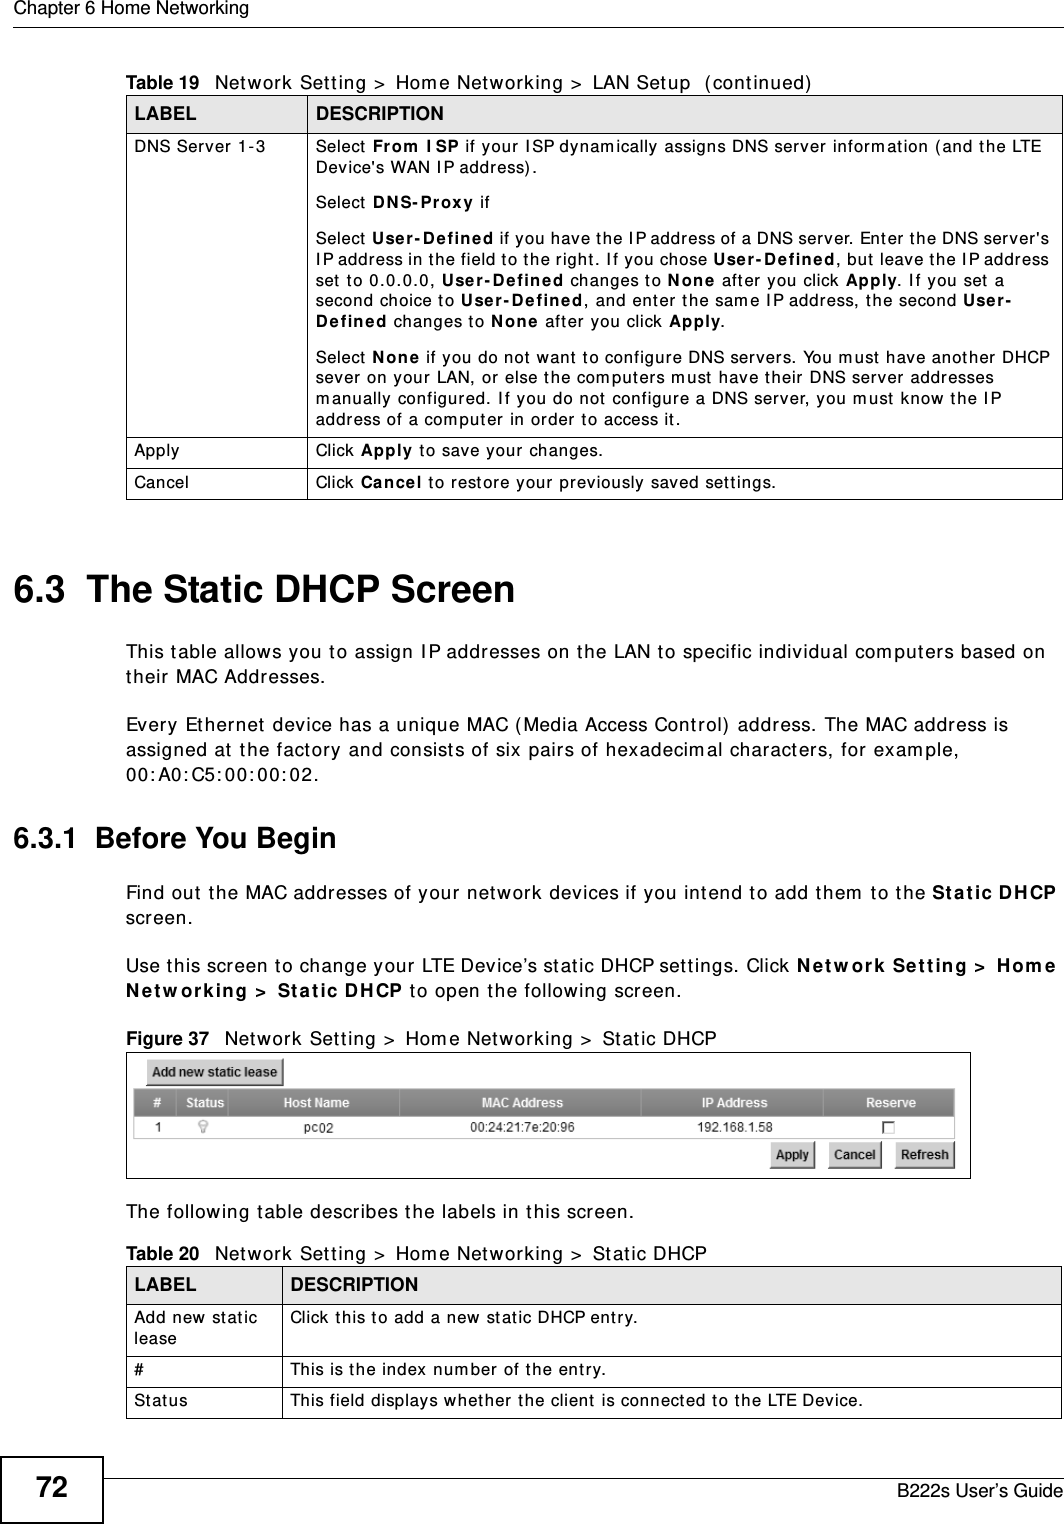 Chapter 6 Home NetworkingB222s User’s Guide726.3  The Static DHCP ScreenThis t able allows you t o assign I P addresses on the LAN to specific individual com put ers based on their MAC Addresses. Every Et hernet device has a unique MAC ( Media Access Cont rol)  address. The MAC address is assigned at  the fact ory and consist s of six pairs of hexadecim al charact ers, for exam ple, 00: A0: C5: 00: 00: 02.6.3.1  Before You BeginFind out t he MAC addresses of your network devices if you int end to add t hem  t o t he St at ic D HCP screen.Use t his screen t o change your LTE Device’s stat ic DHCP sett ings. Click N et w ork Set ting &gt;  Hom e N e t w or k in g &gt;  St at ic DH CP t o open t he following screen.Figure 37   Net work Set ting &gt;  Hom e Net w orking &gt;  Stat ic DHCP The following t able describes t he labels in t his screen.DNS Server 1-3 Select  From  I SP if your  I SP dynam ically assigns DNS server inform at ion ( and t he LTE Device&apos;s WAN I P address).Select  D NS- Prox y if Select  User- Defined if you have t he I P address of a DNS ser ver. Ent er t he DNS server&apos;s I P address in t he field to t he r ight . I f you chose User - Defin ed, but  leave t he I P address set t o 0.0.0.0, User - Define d changes t o N on e  aft er you click Apply. I f you set  a second choice t o U se r- De fine d, and enter t he sam e I P address, t he second Use r-De fined changes t o N o ne  aft er you click Apply. Select  N o ne  if you do not want t o configure DNS servers. You m ust have anot her DHCP sever on your  LAN, or else t he com put ers m ust  have t heir DNS server addresses m anually configured. I f you do not  configure a DNS serv er, you m ust know the I P address of a com put er in order t o access it .Apply Click Apply to save your changes.Cancel Click Ca ncel to restore your previously saved set t ings.Table 19   Network Sett ing &gt;  Hom e Net working &gt;  LAN Setup  (continued)LABEL DESCRIPTIONTable 20   Network Set t ing &gt;  Hom e Net working &gt;  Static DHCPLABEL DESCRIPTIONAdd new stat ic leaseClick t his to add a new st at ic DHCP ent ry. # This is t he index num ber of the entr y.St at us This field displays whet her t he client is connect ed t o t he LTE Device.